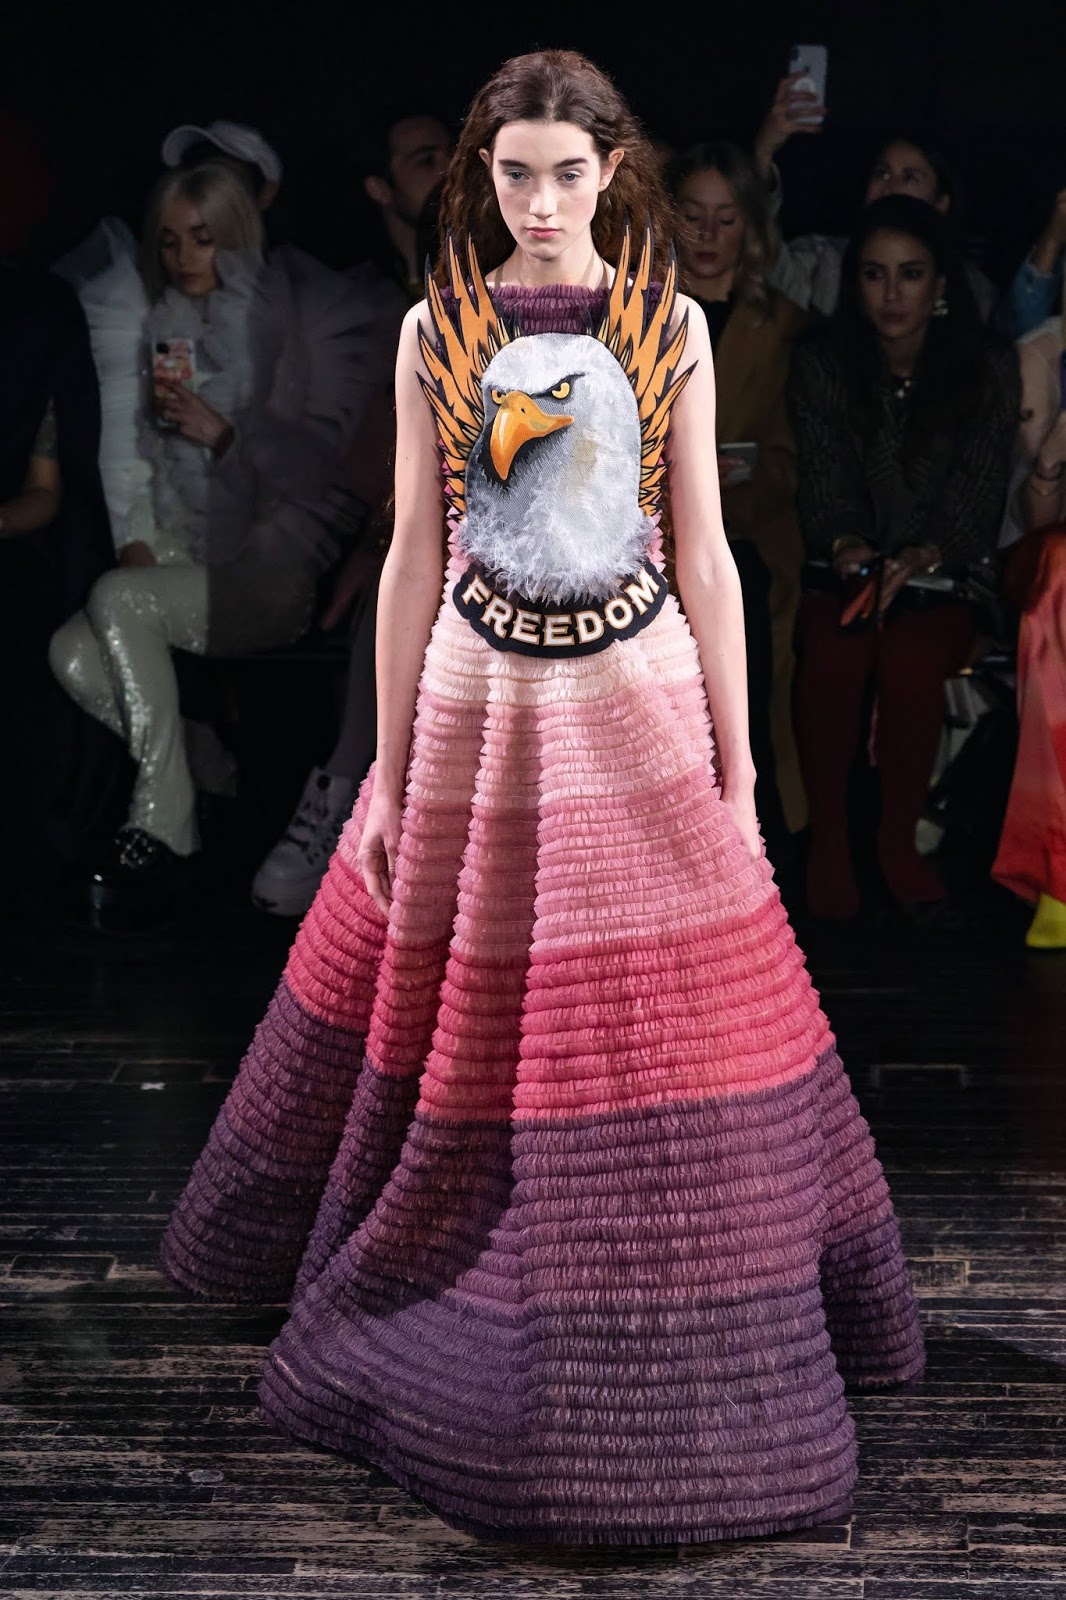 Making a Statement: Viktor and Rolf